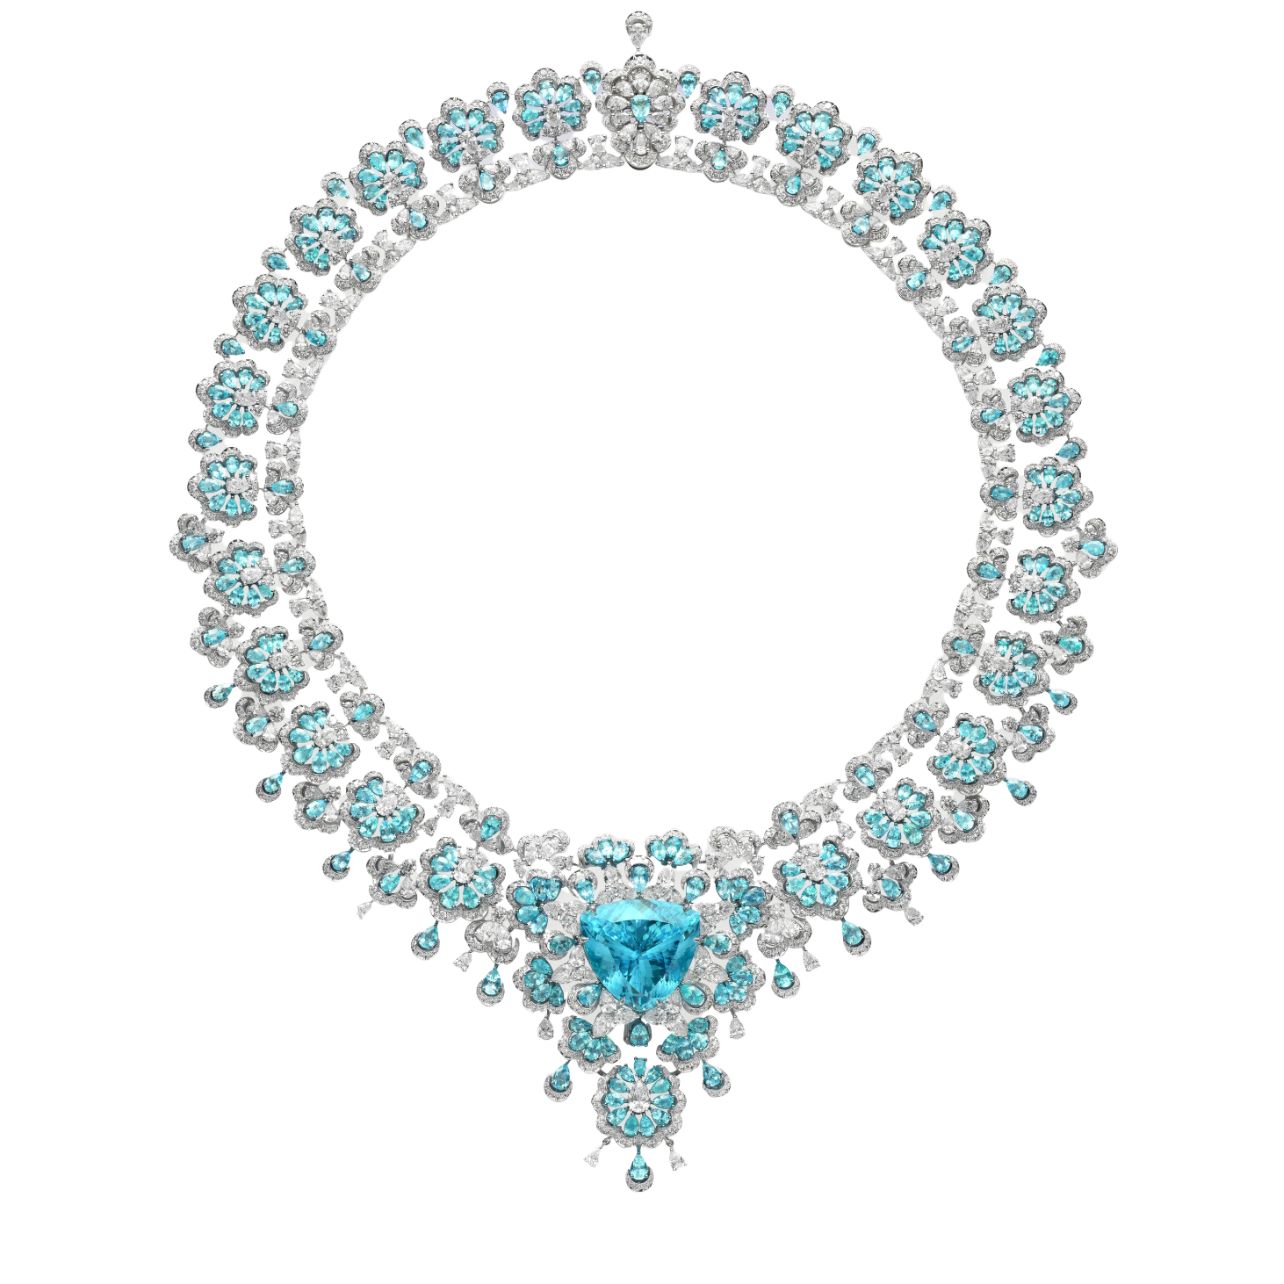 Haute Joaillerie Collection necklace featuring a 34.63-carat triangle-cut paraíba tourmaline, 35.77 carats of paraíba tourmalines, and 43.38 carats of diamonds set in 18k white gold and titanium.